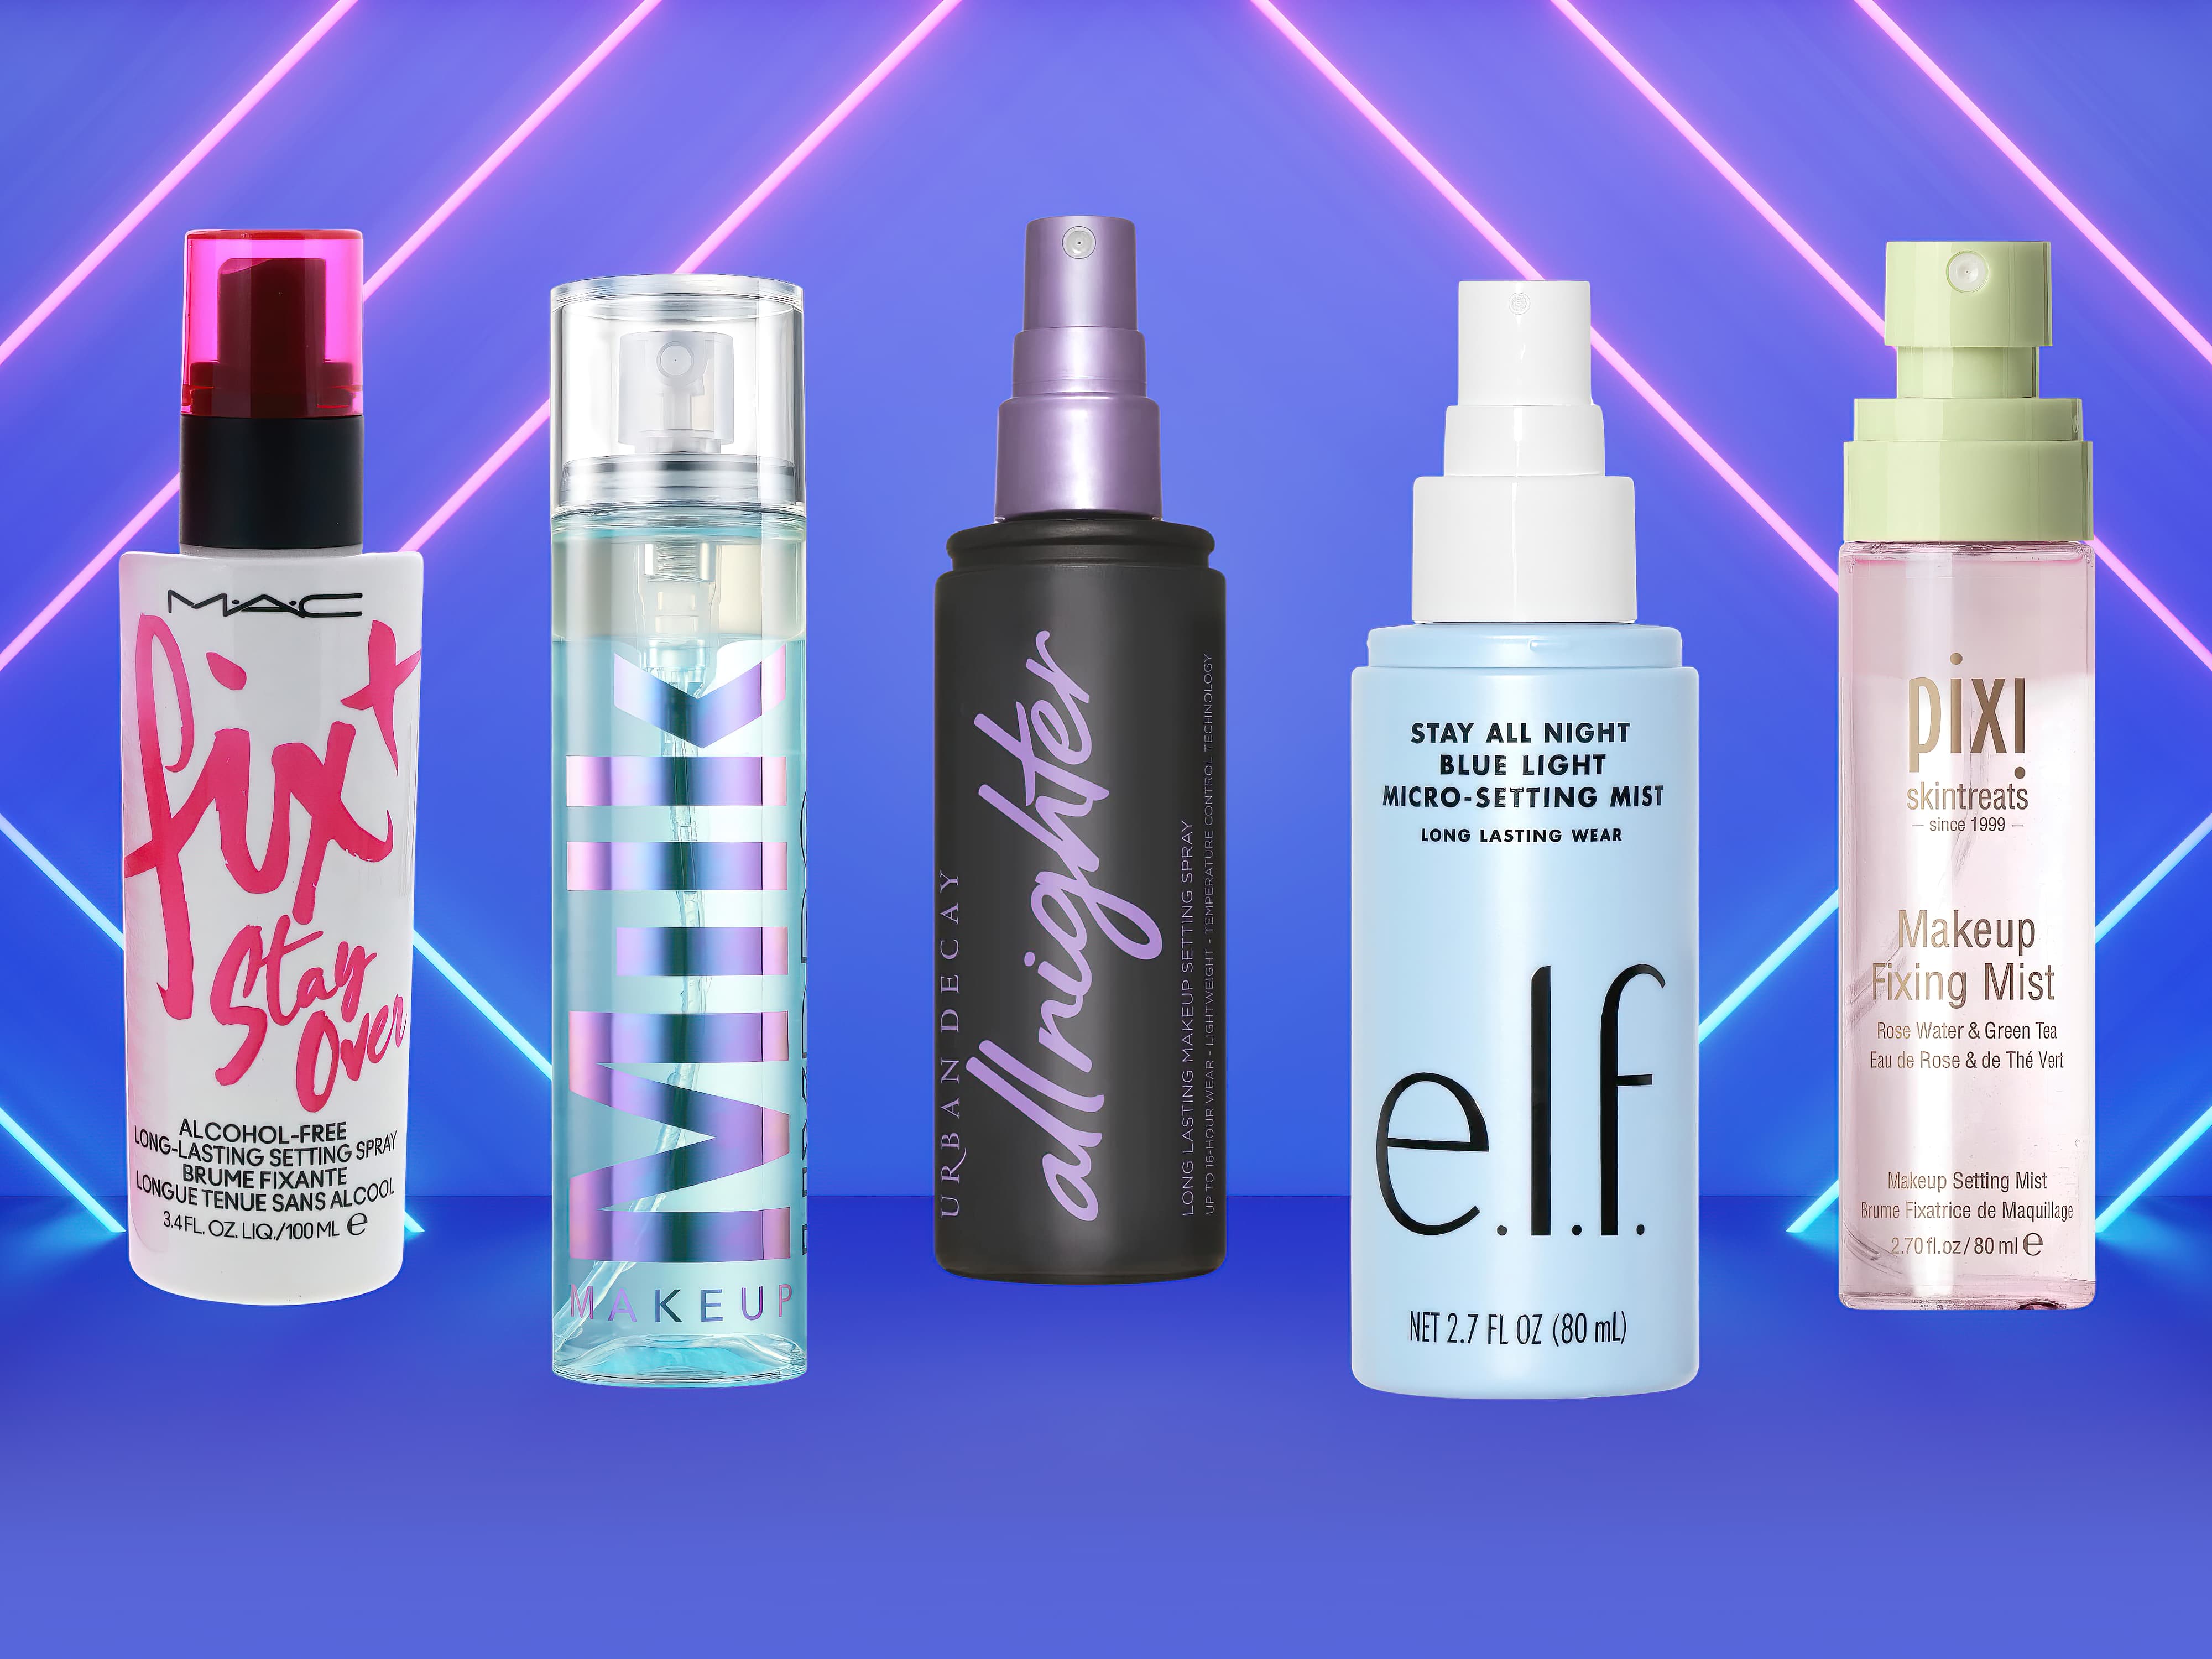 Five different brands of the best makeup setting spray bottles against a neon-lit background